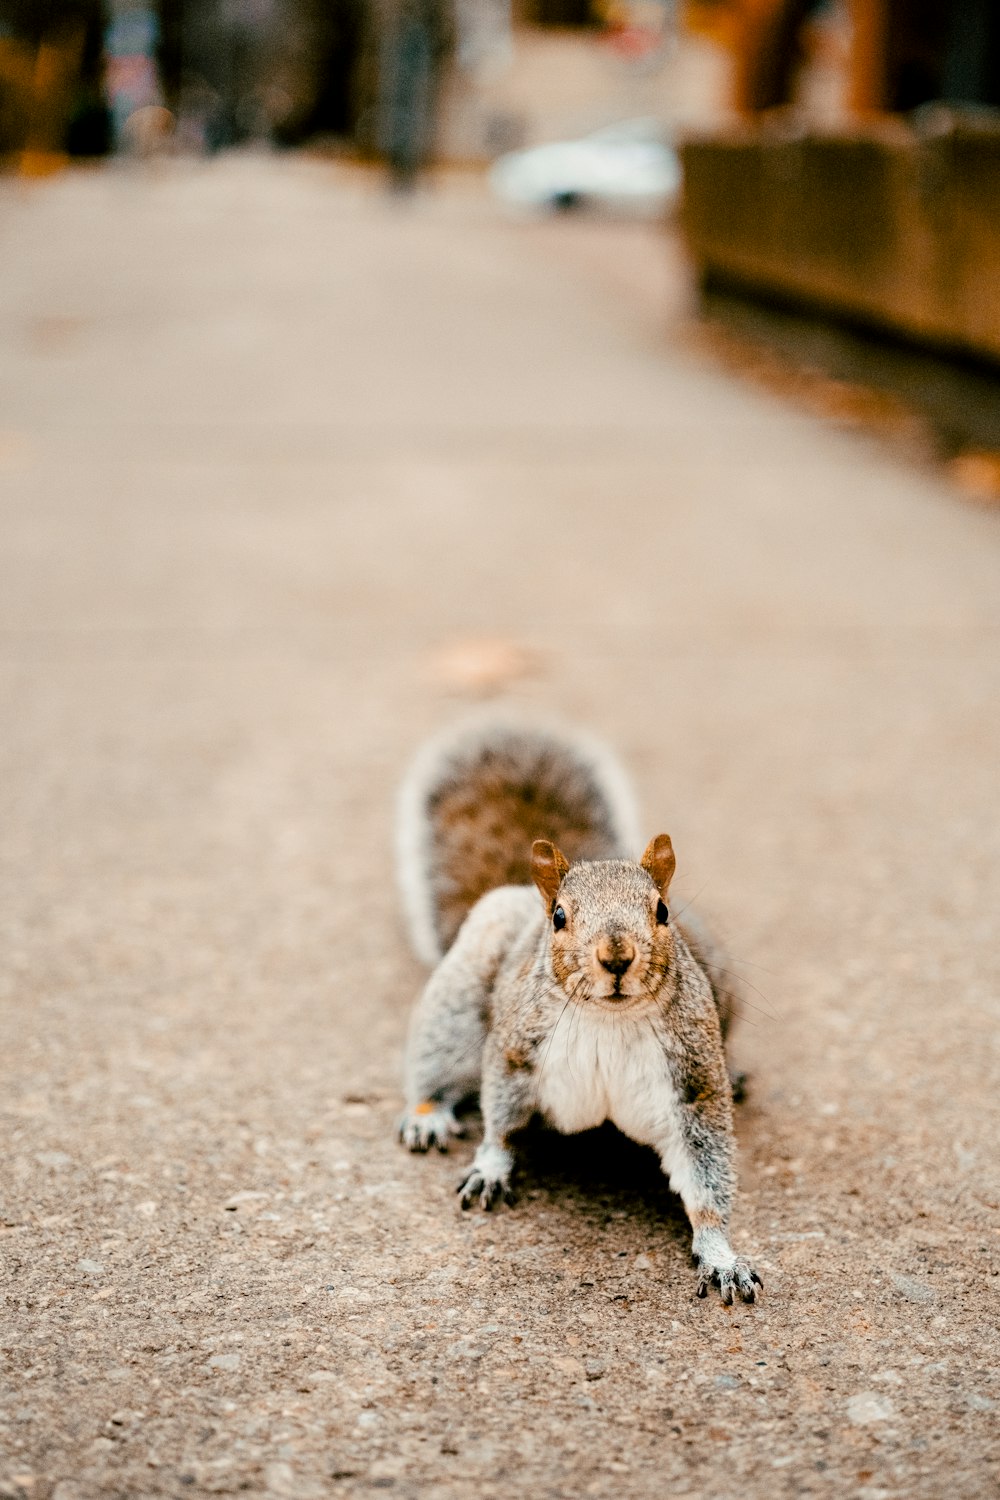 a small squirrel is standing on the ground